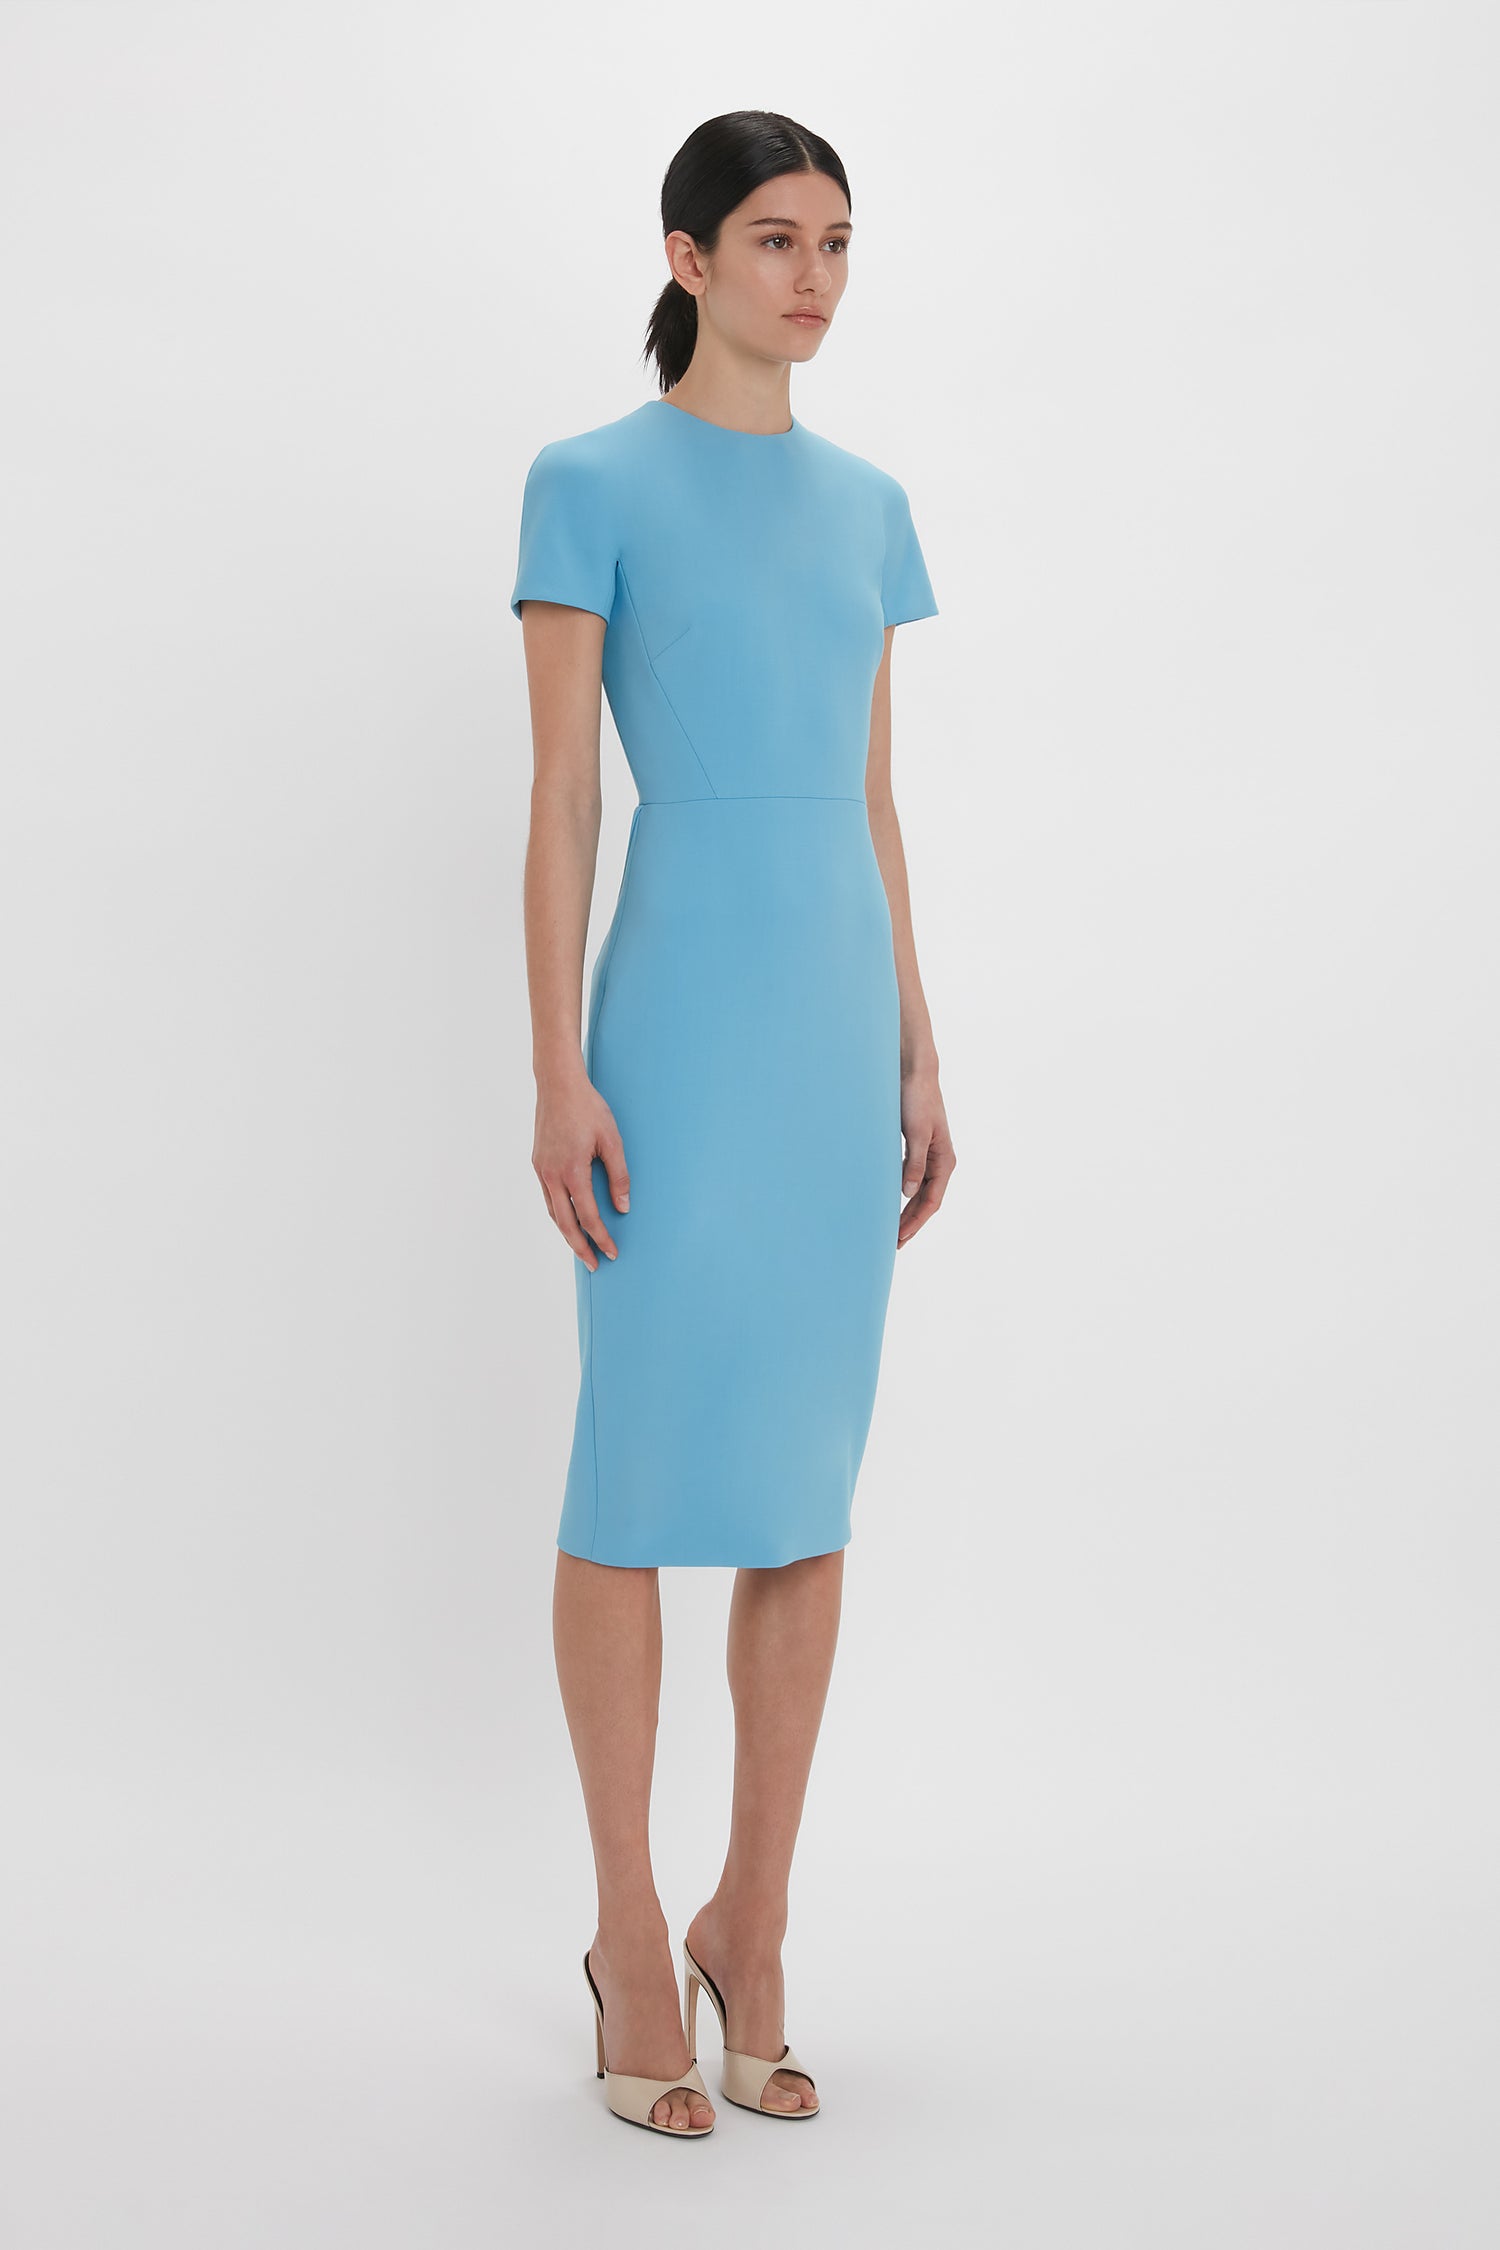 A woman in an Exclusive Fitted T-Shirt Dress In Periwinkle Blue by Victoria Beckham, paired with silver heels, standing against a white background.